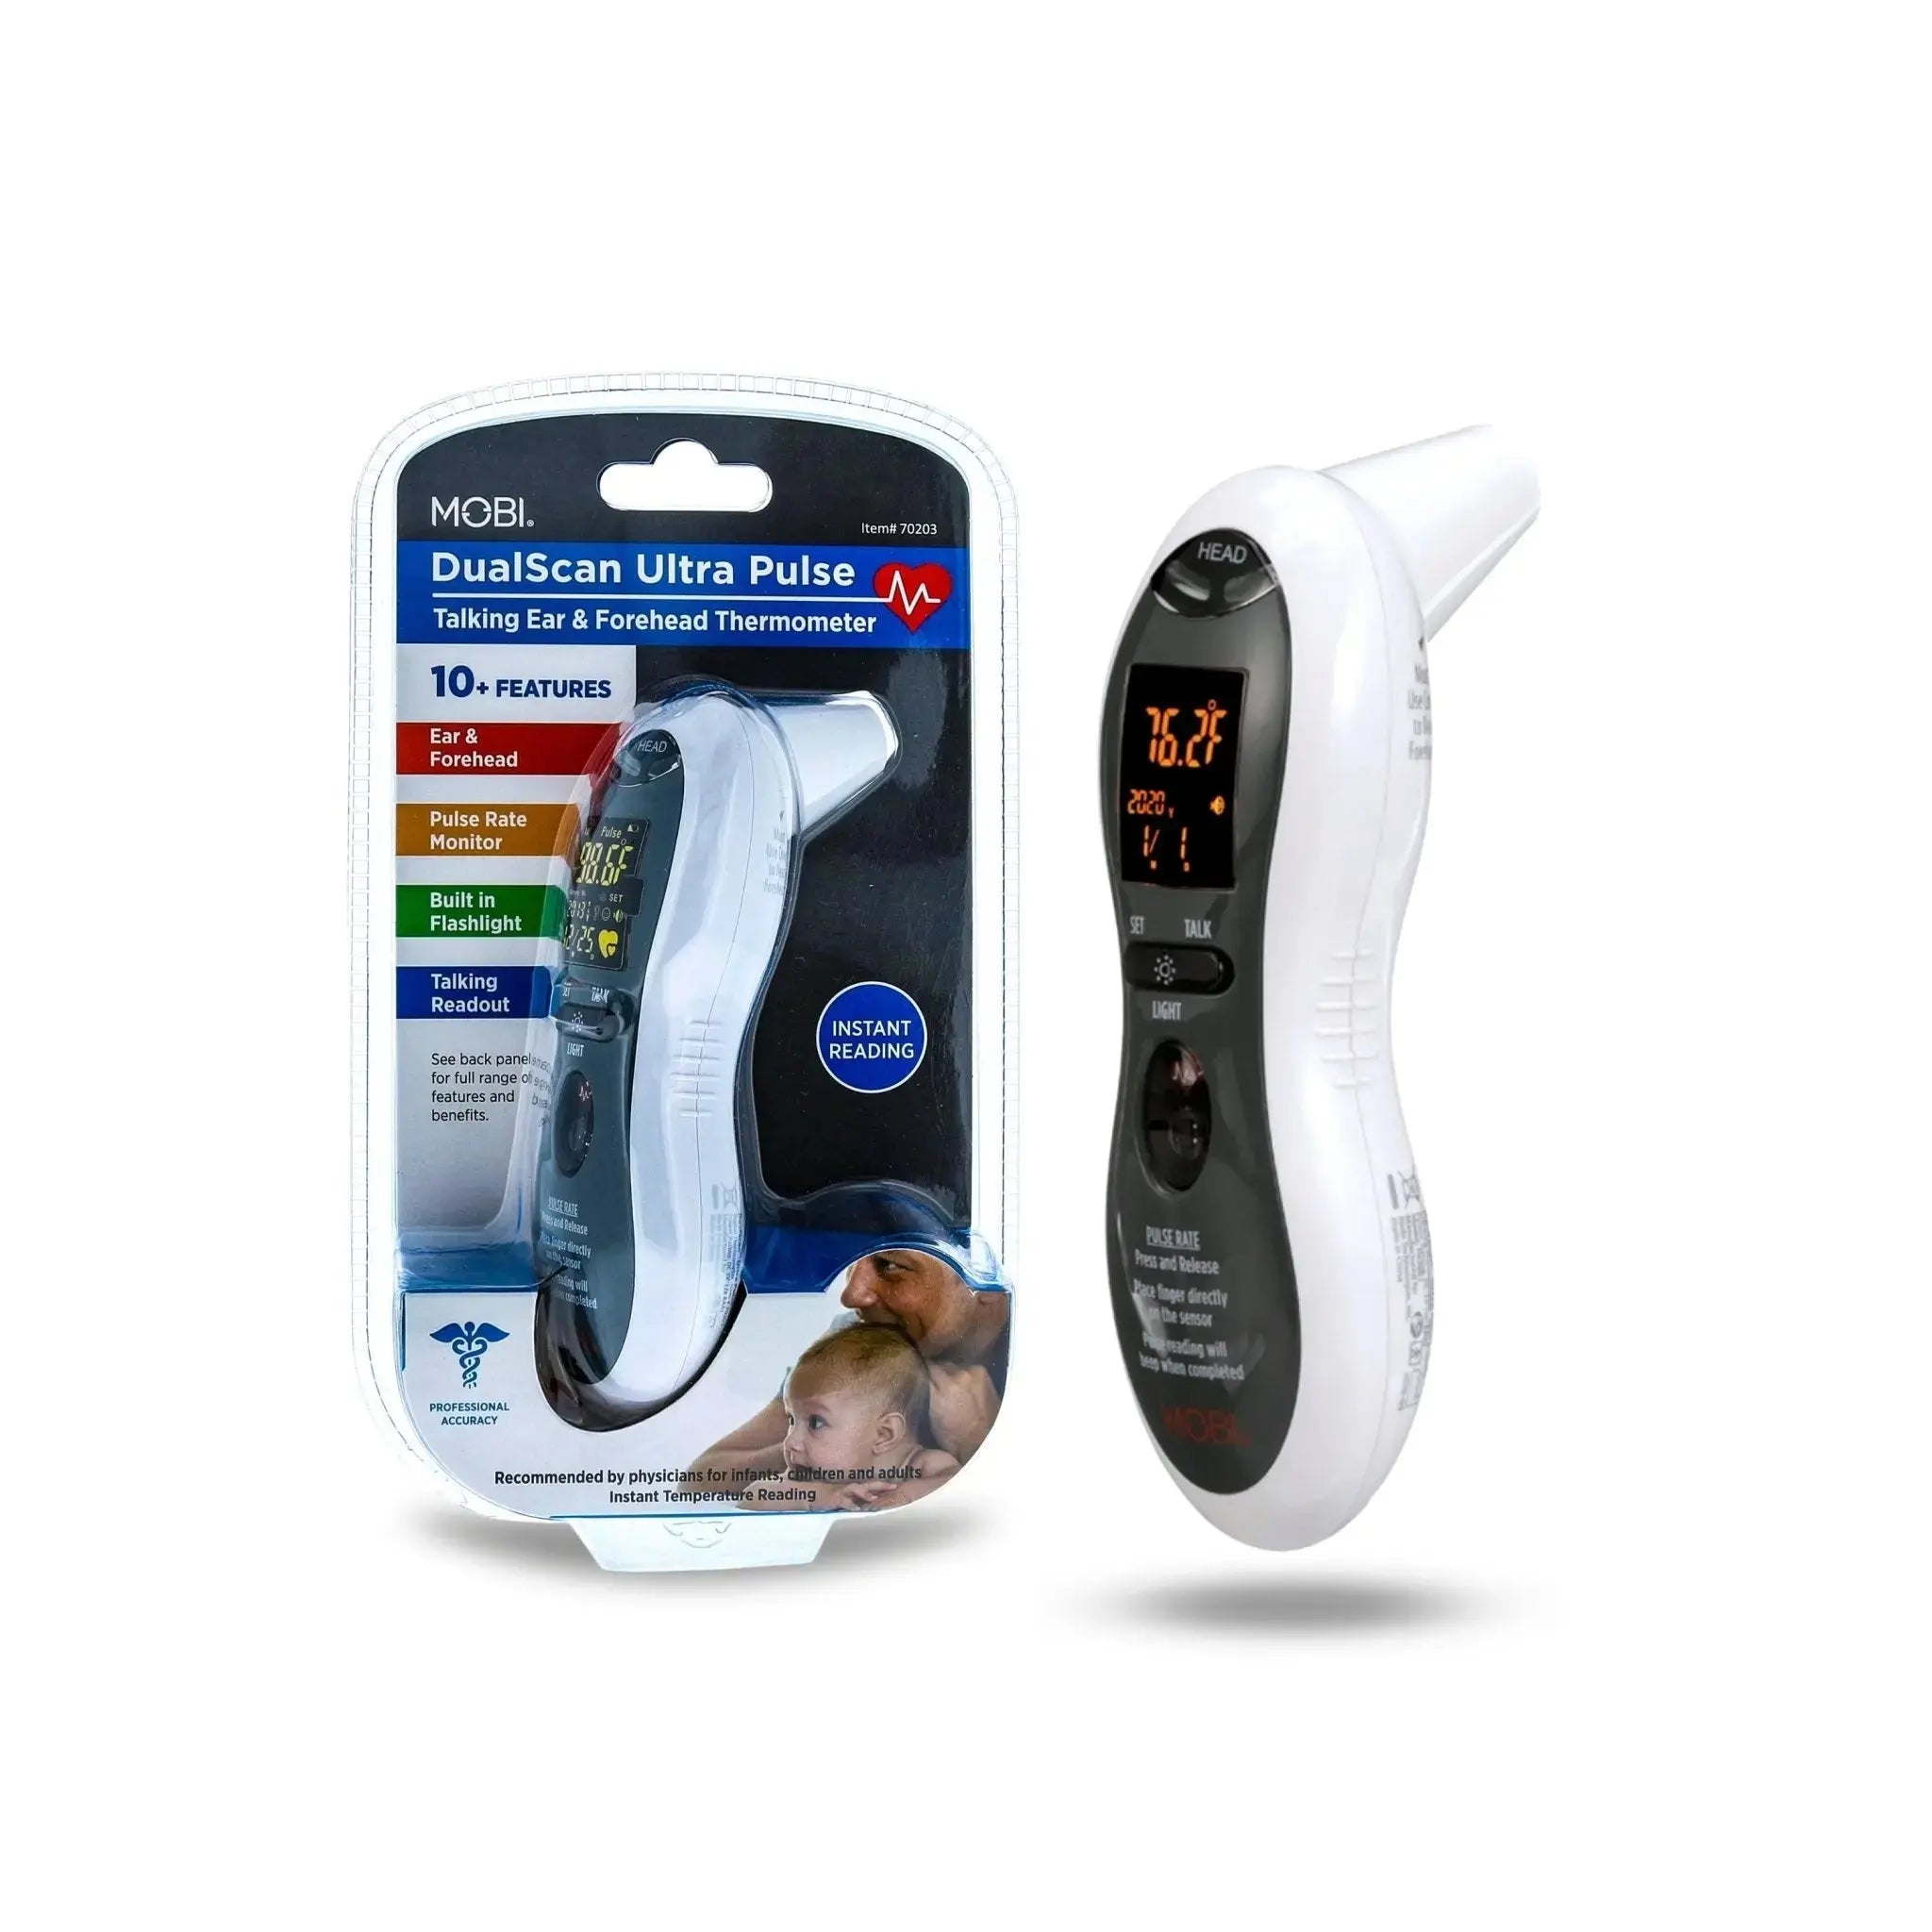 DualScan Ultra Pulse Talking Ear & Forehead Thermometer with 10+ Features - MOBI USA